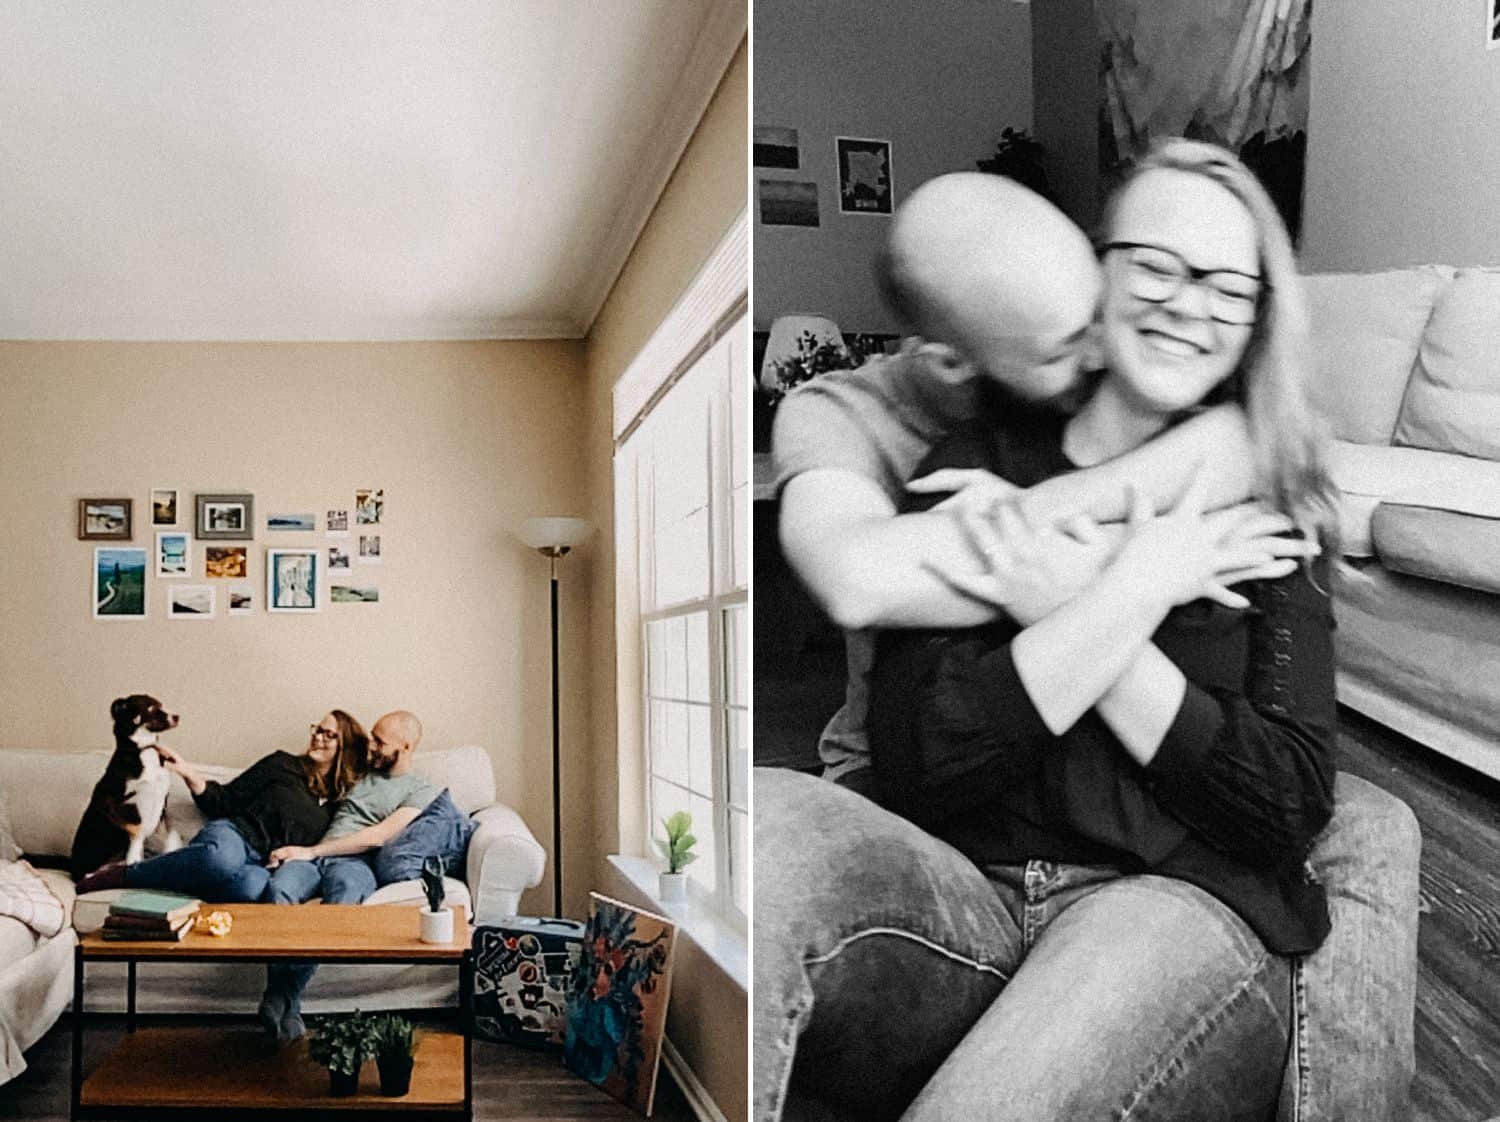 Two couples (one with a dog) are photographed in their homes via FaceTime by Barbara O. Photography